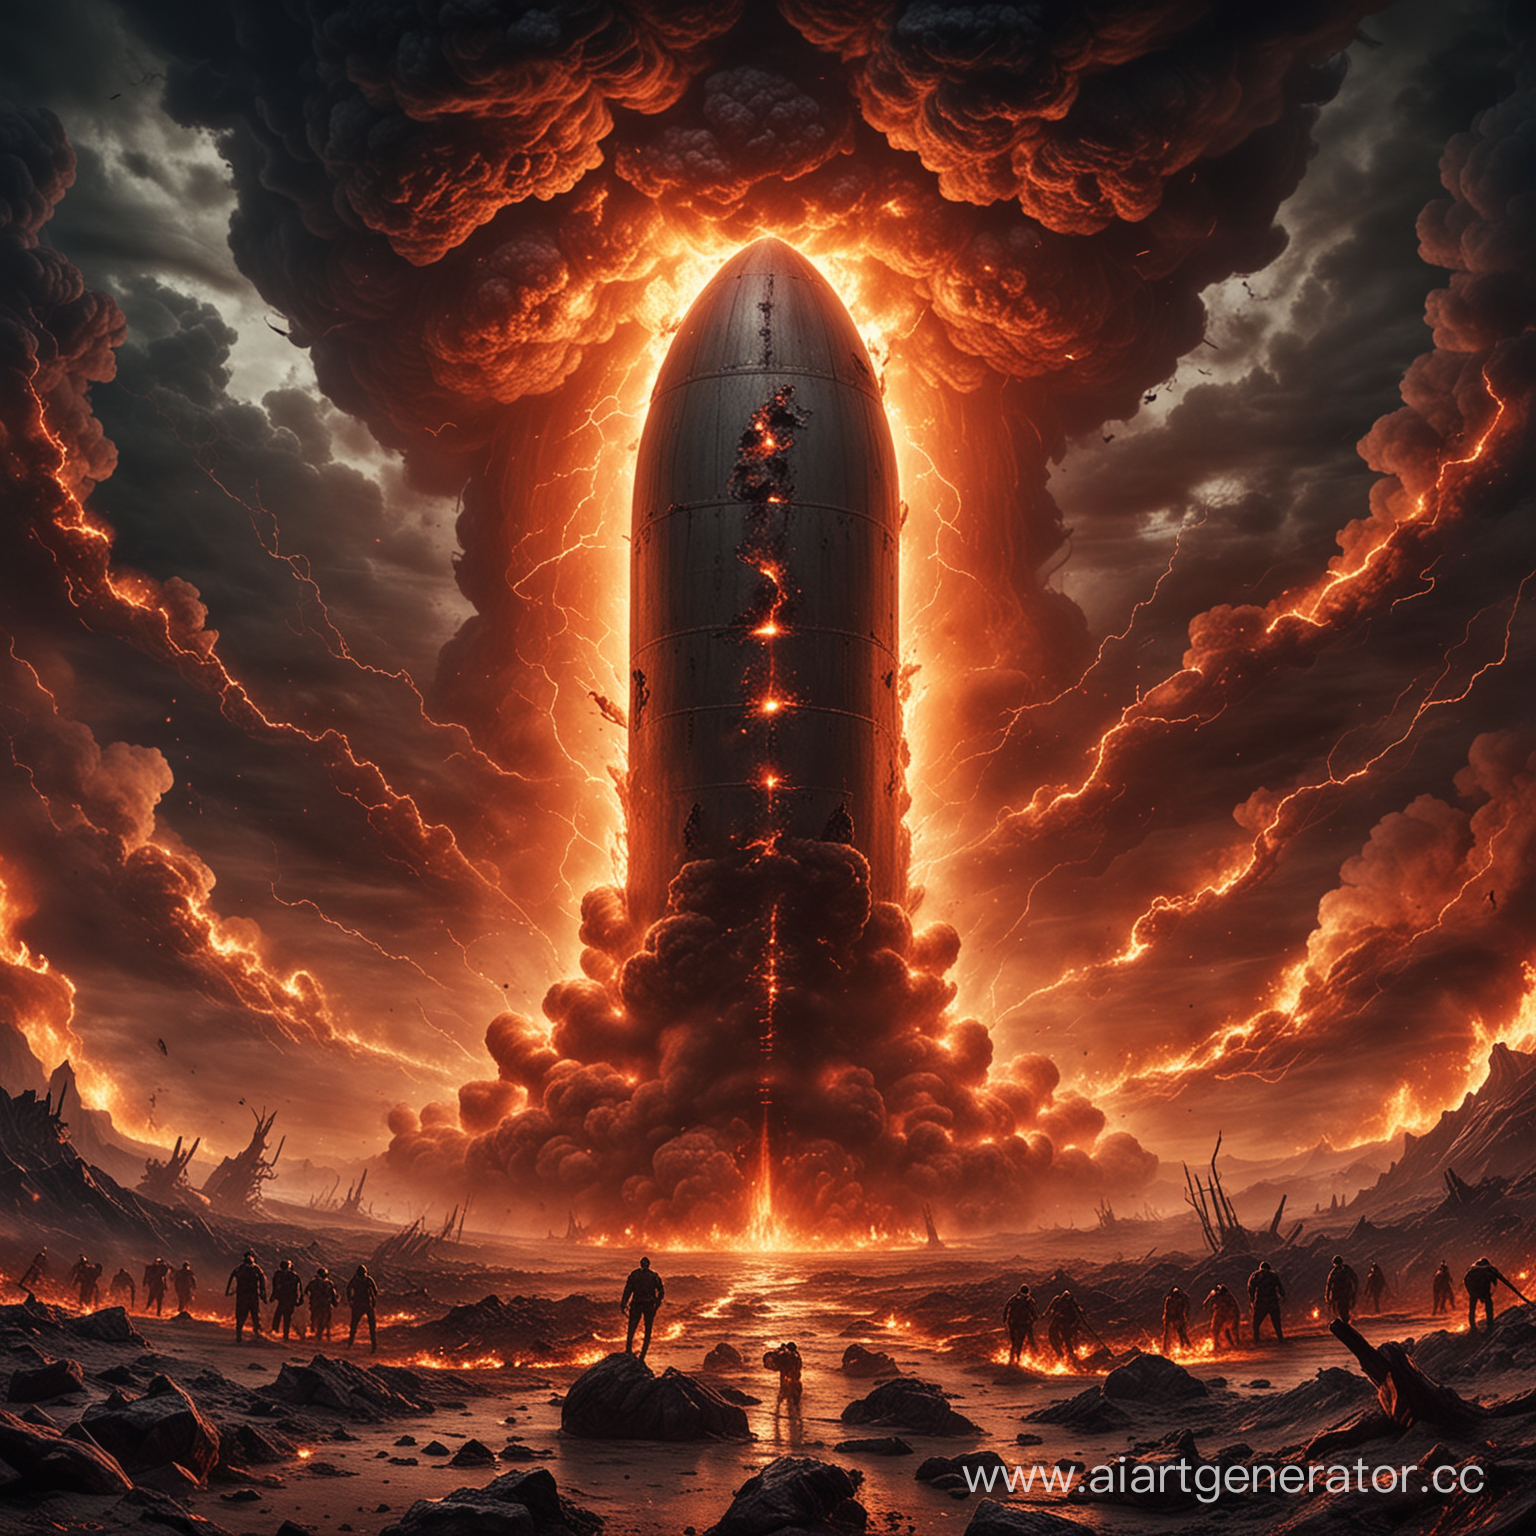 Giant demonic nuclear bomb in the depths of Hell